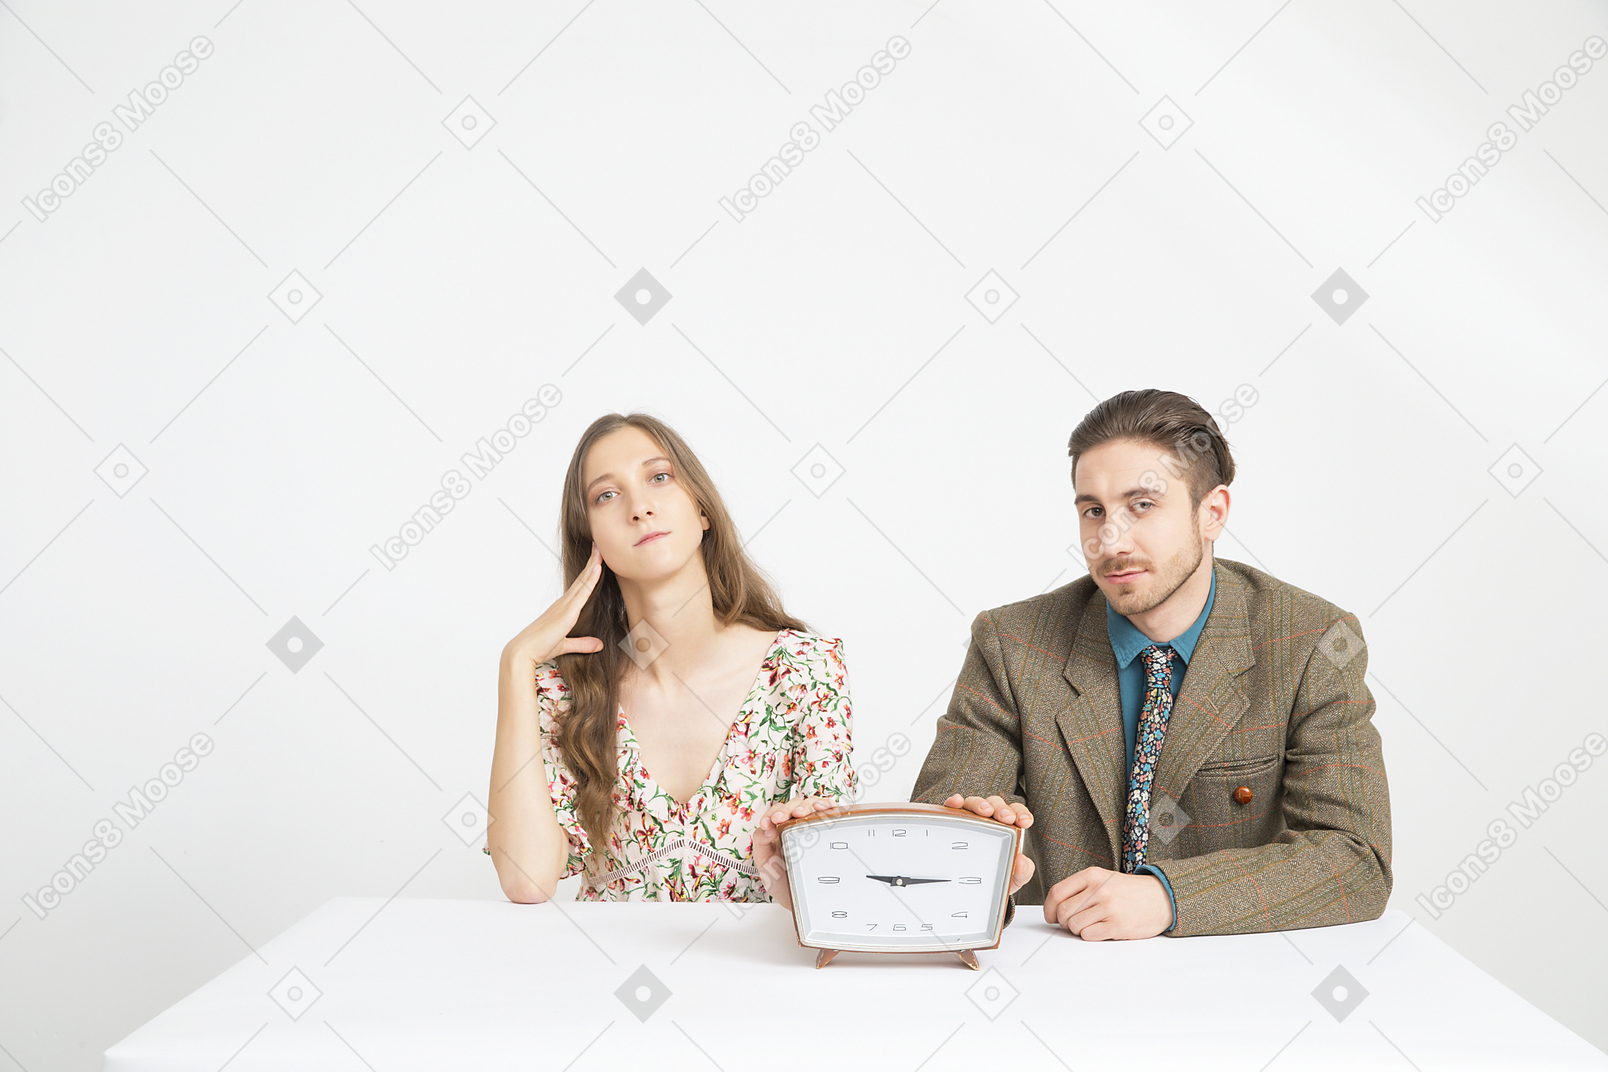 Couple sitting at the table and holding a clock